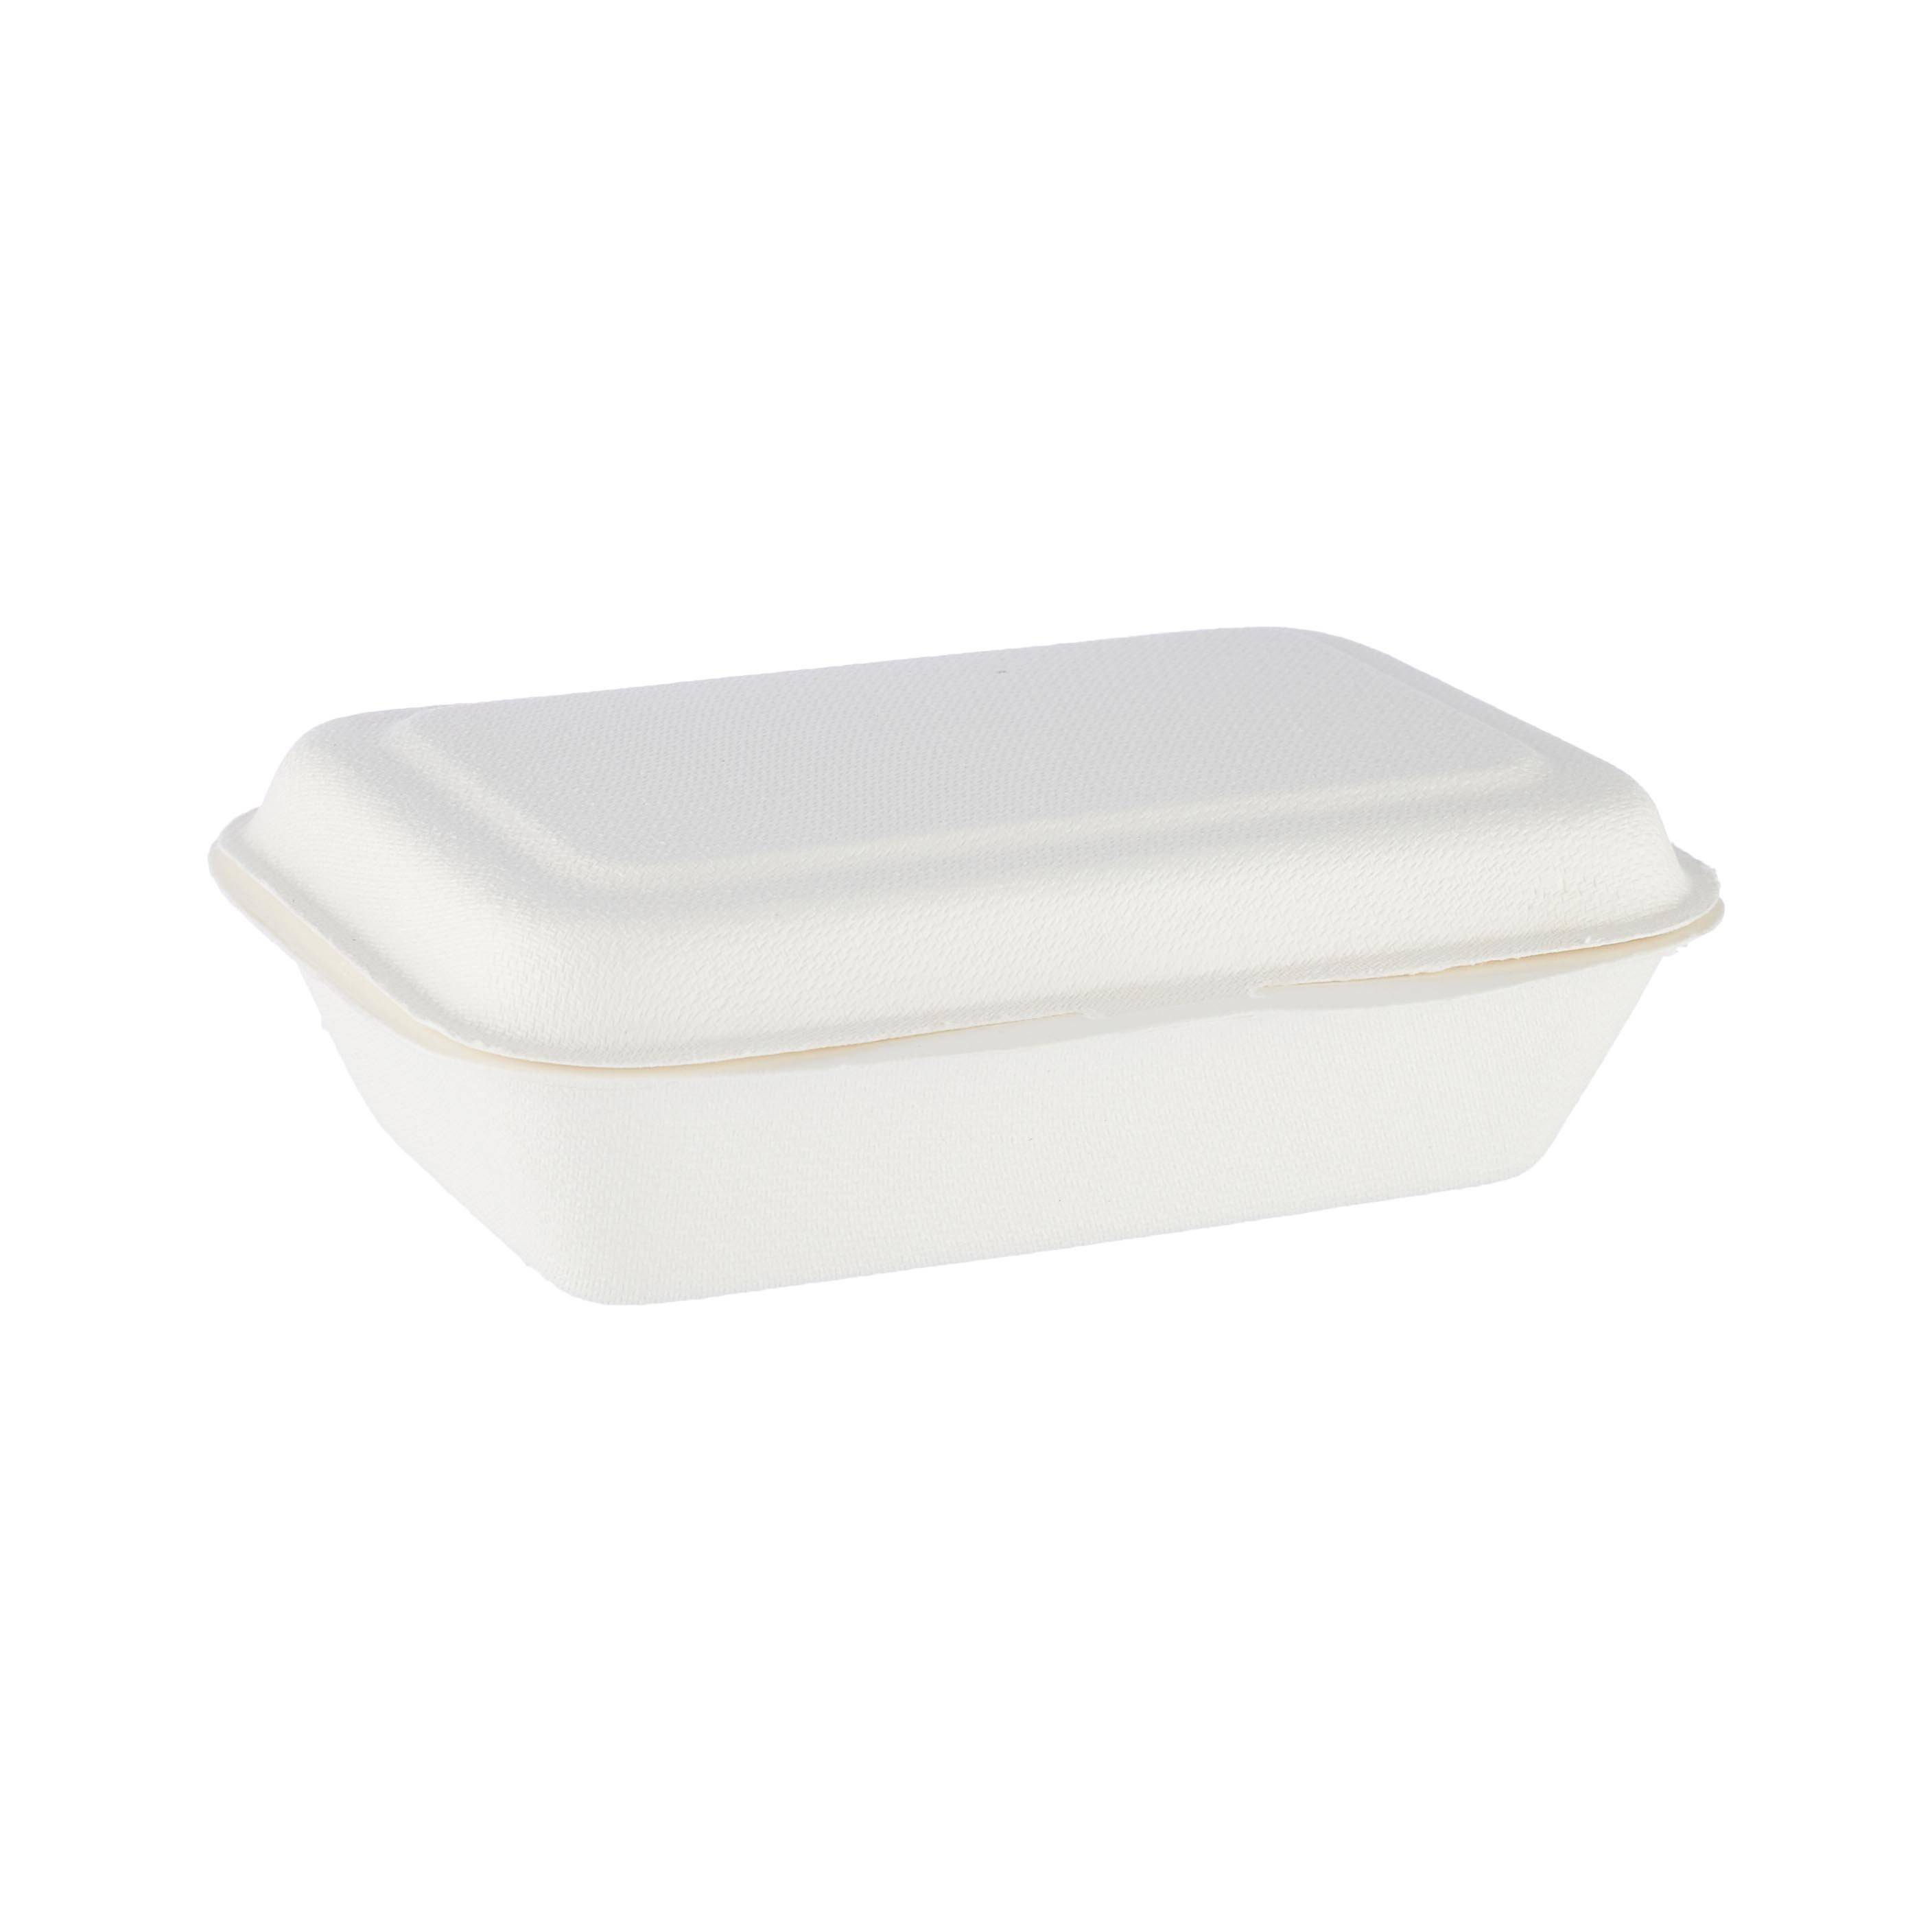 Bio-Degradable Hinged Container 6x4 Inch 1000 Pieces - Hotpack Global